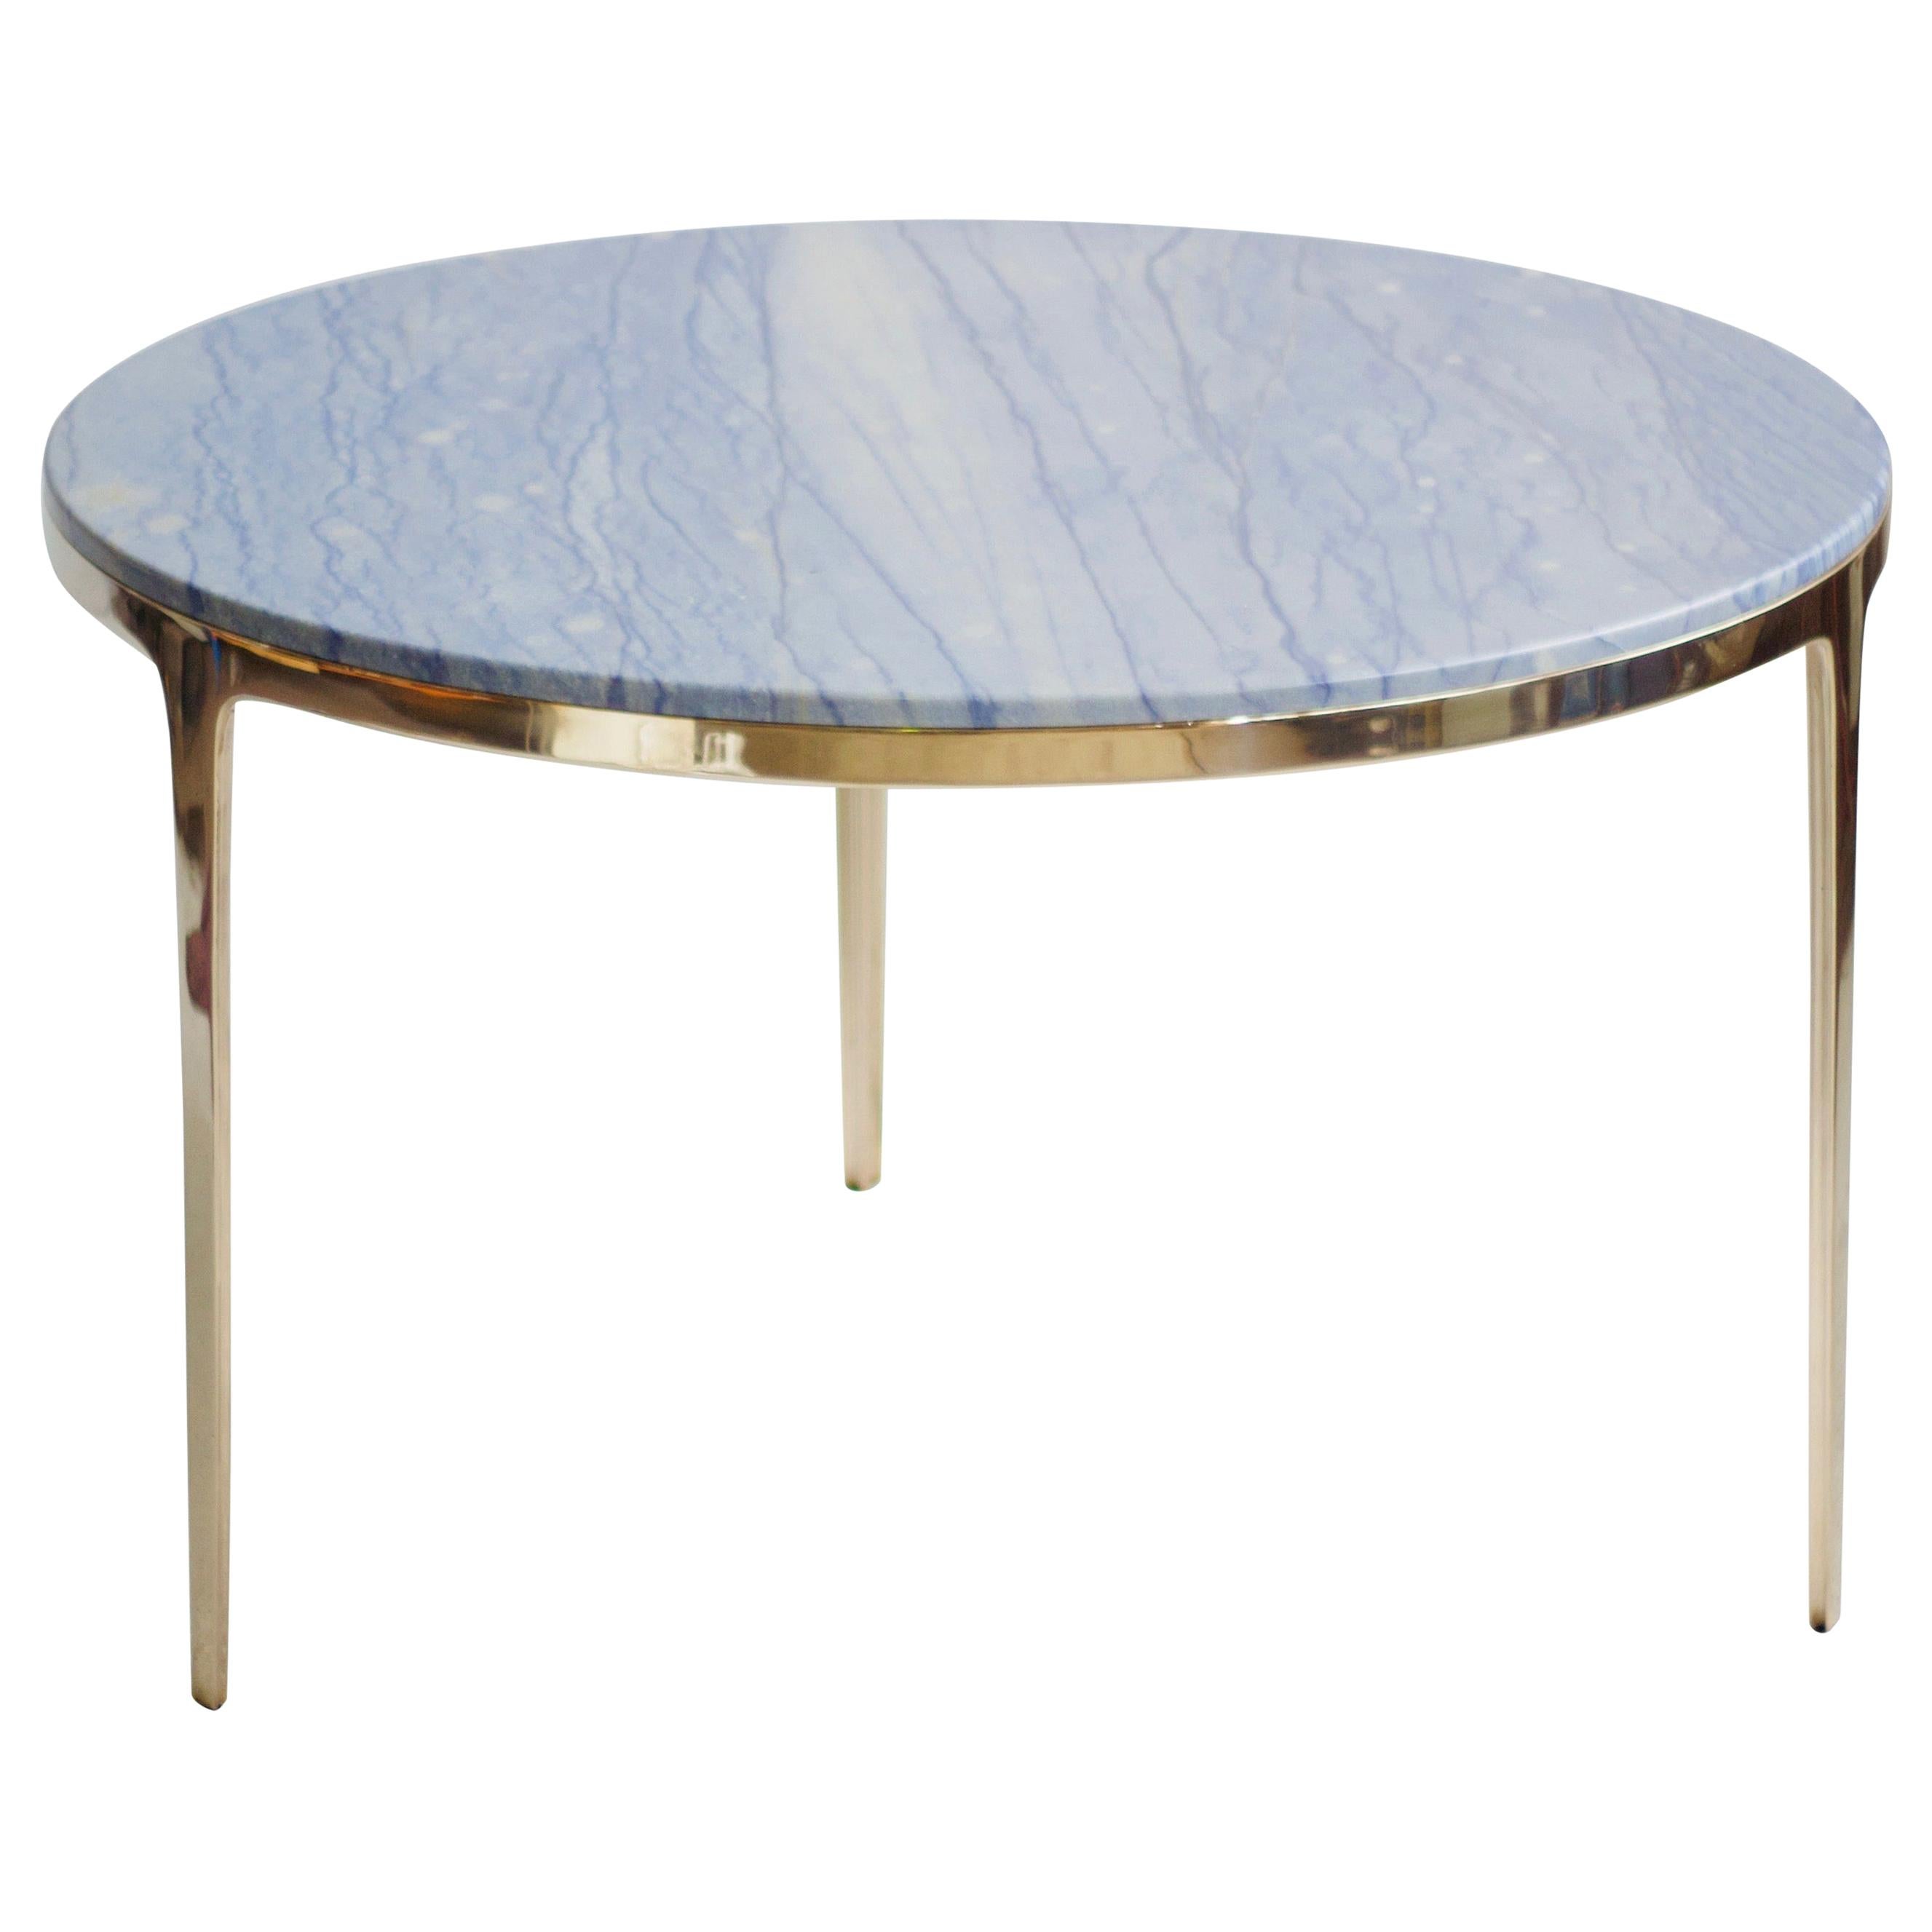 Barbera 'Bronze' Round Table, Modern Solid Bronze Base, Stone Top-Made to order For Sale